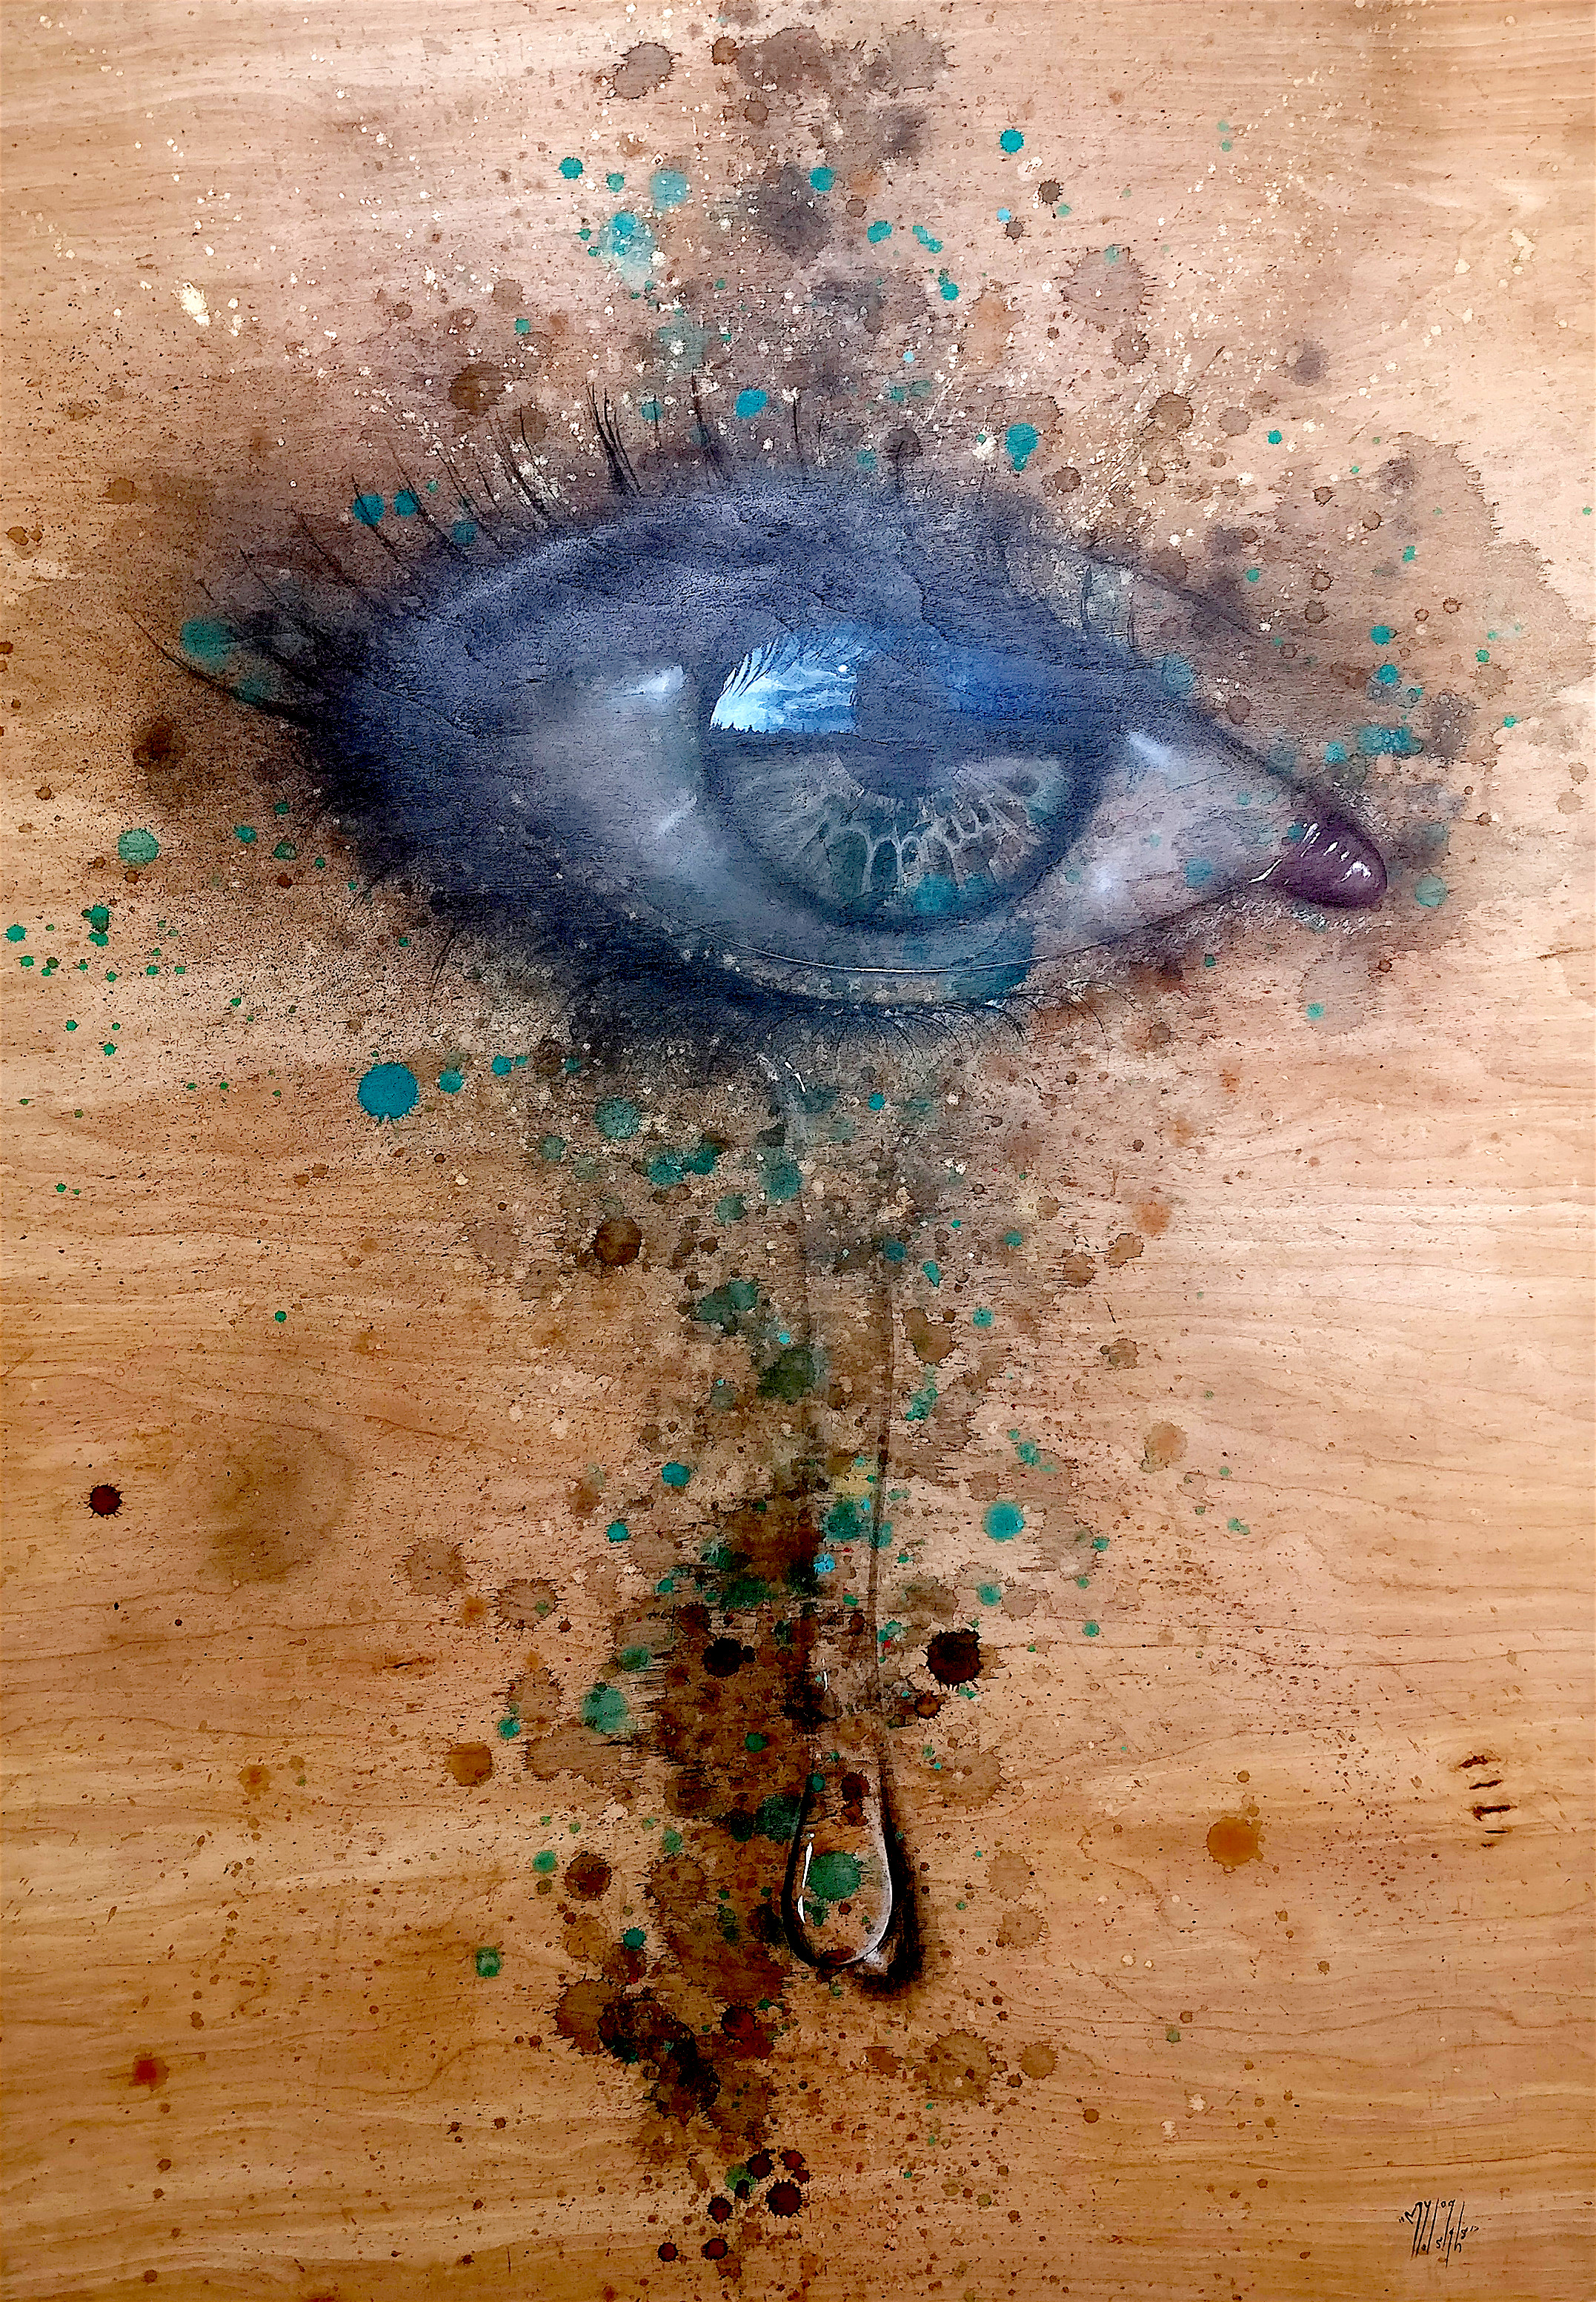 My Dog Sighs | What next